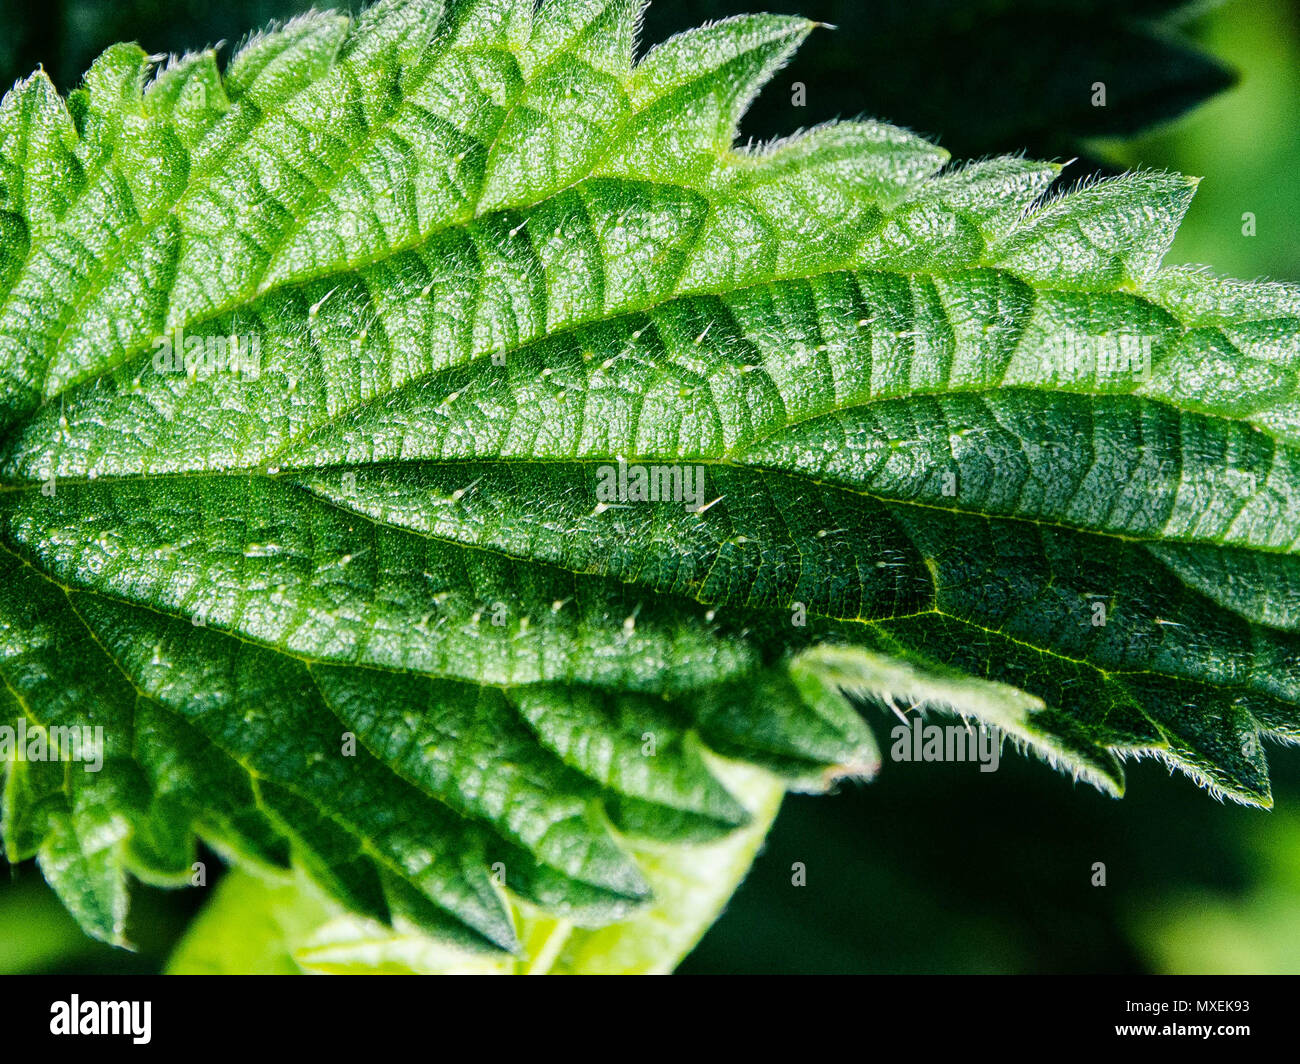 Trichomes on a stinging nettle leaf Stock Photo